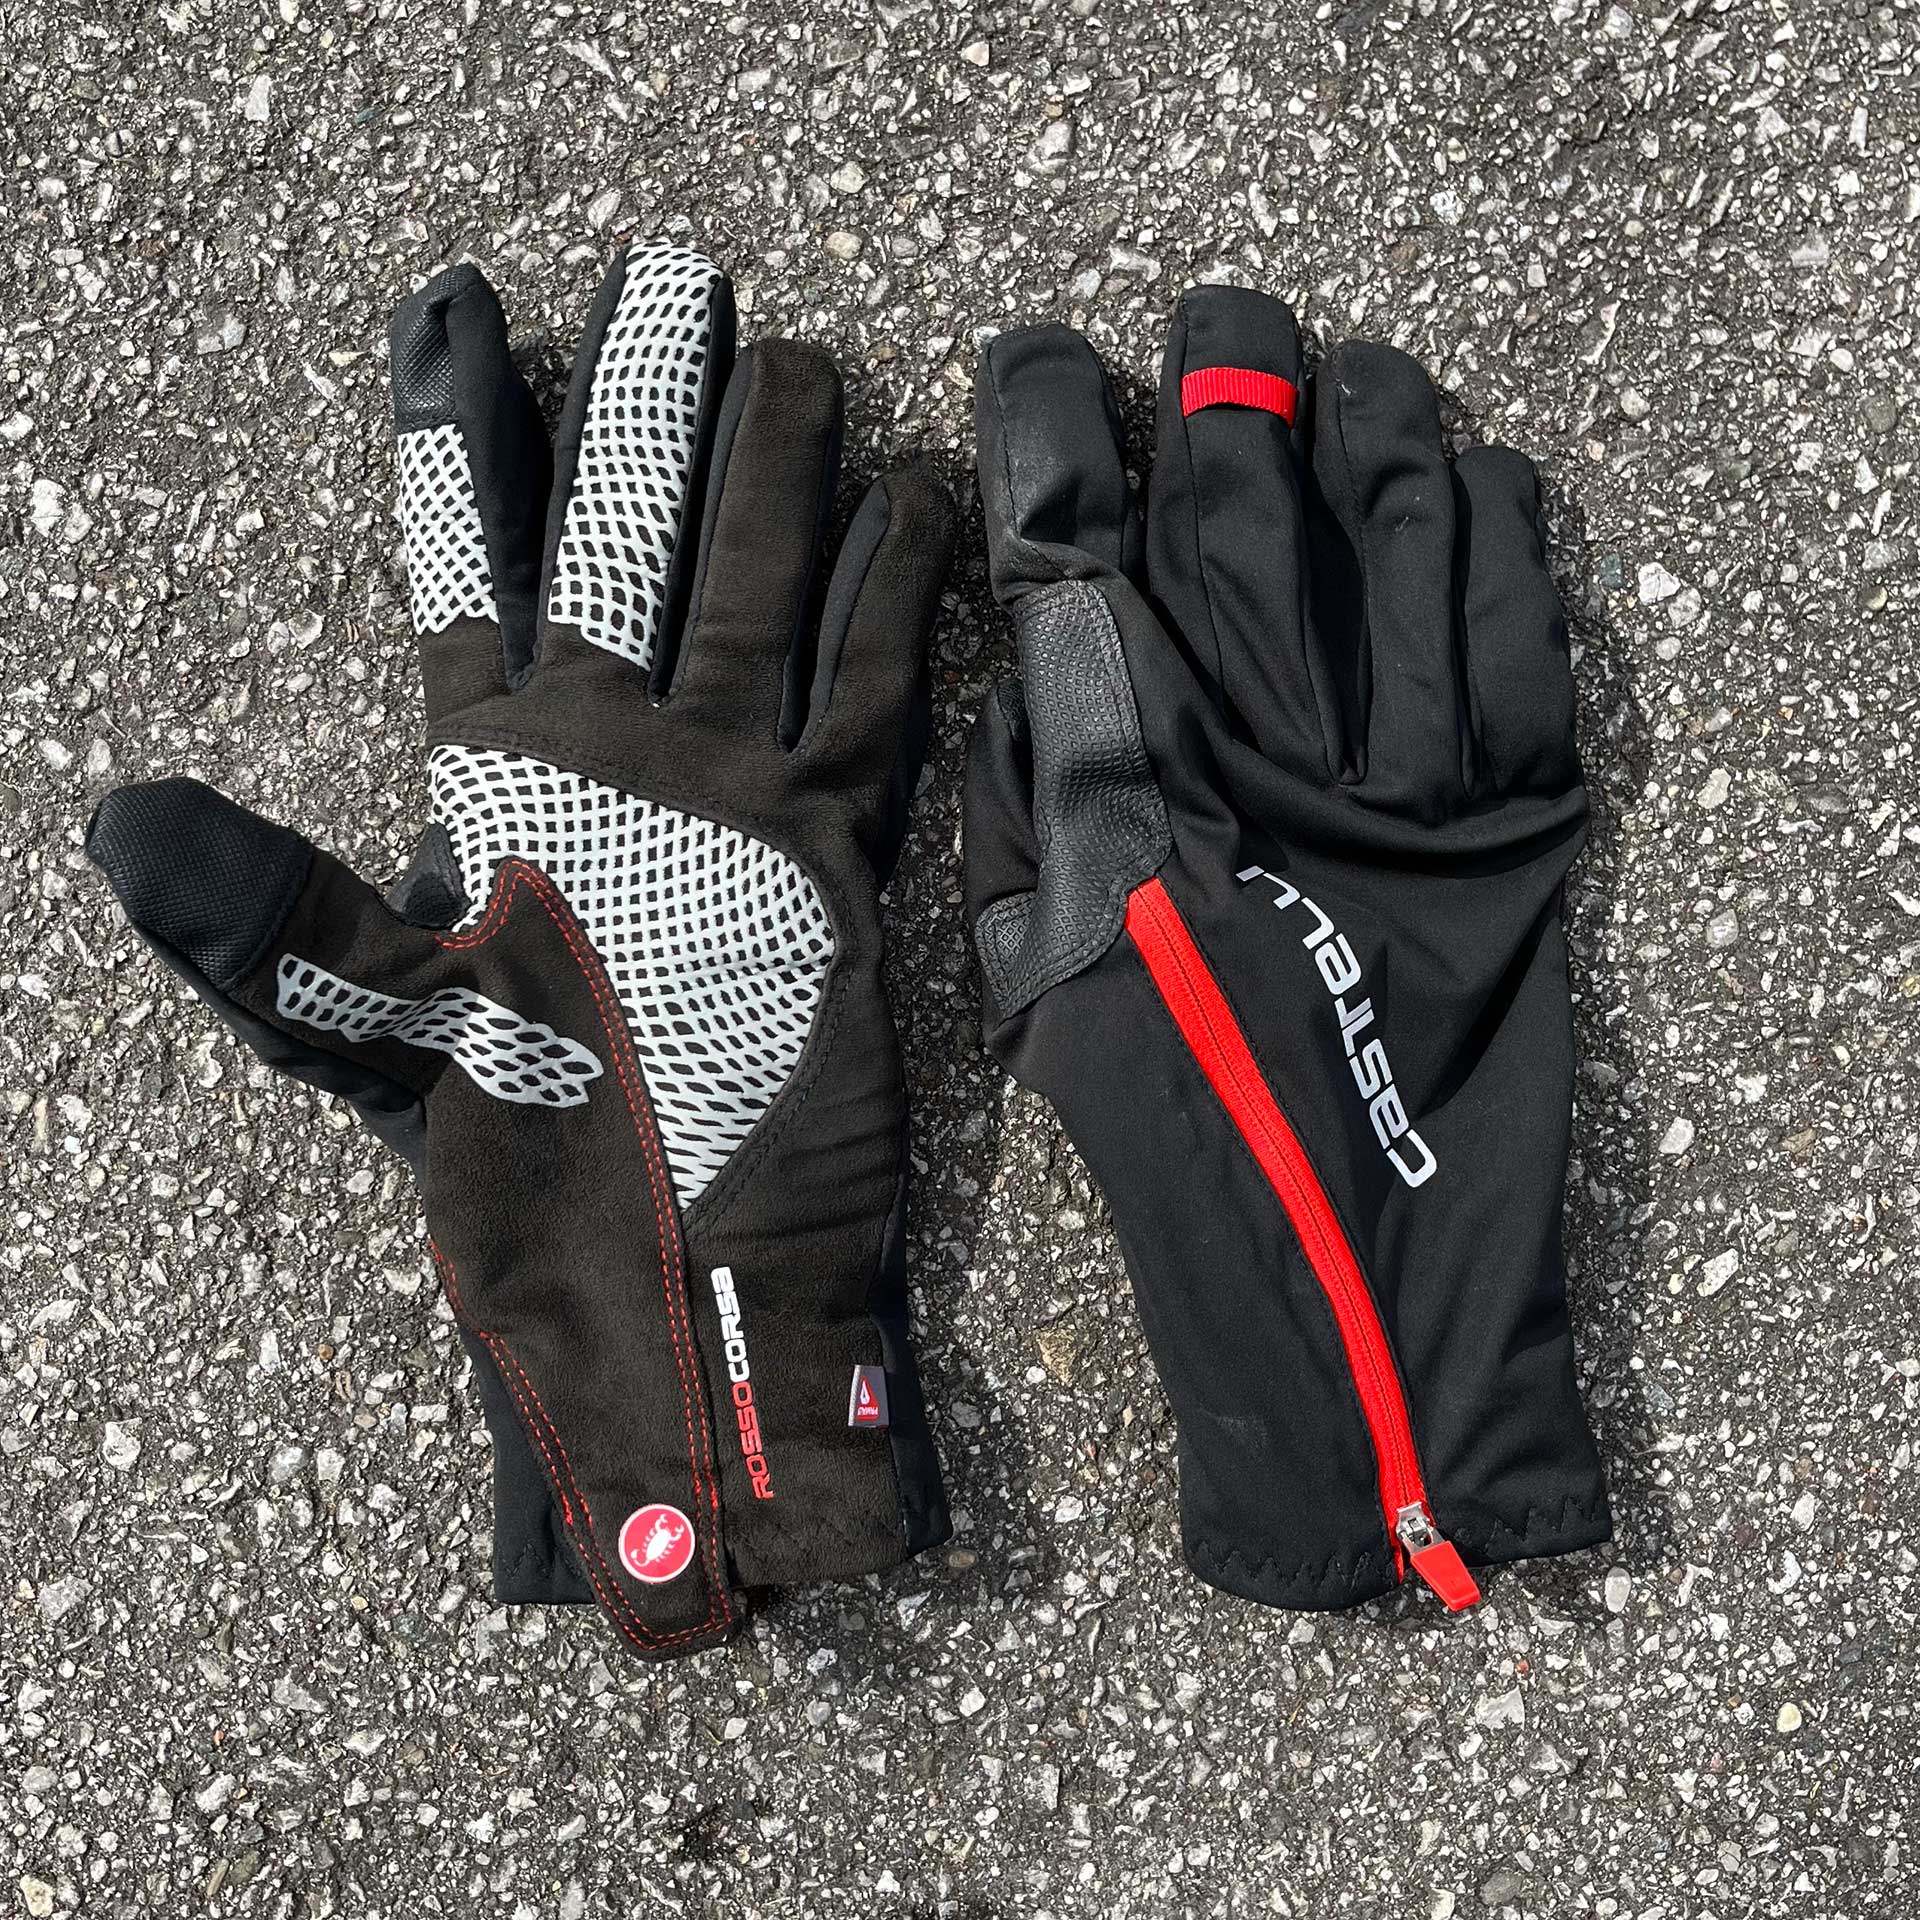 Castelli Spettacolo RoS Winter Cycling Gloves